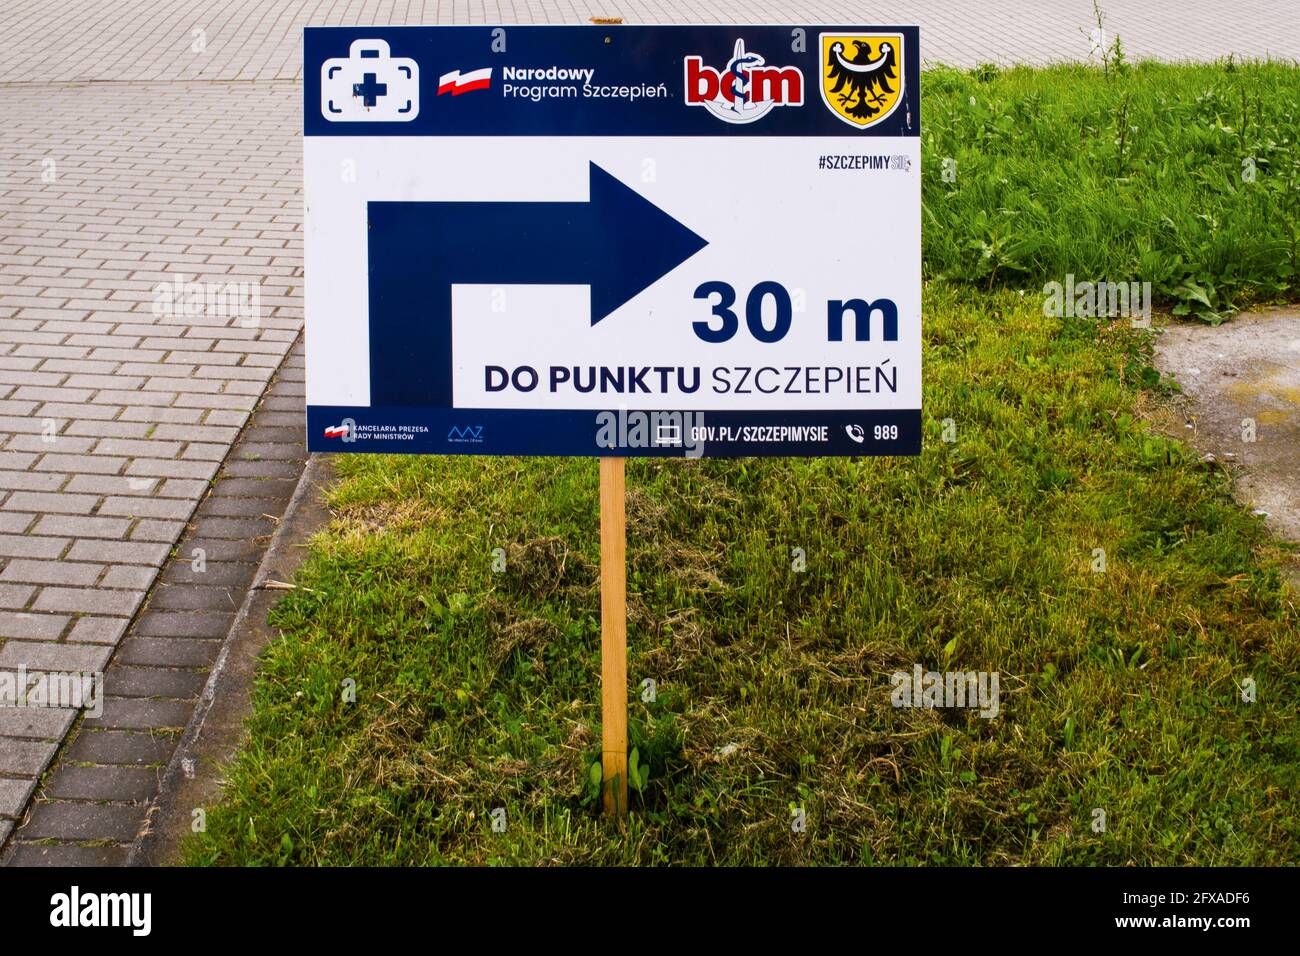 Information sign pointing to the covid-19 vaccination point. Polish national vaccination program. Covid vaccination campaign in Poland. Stock Photo